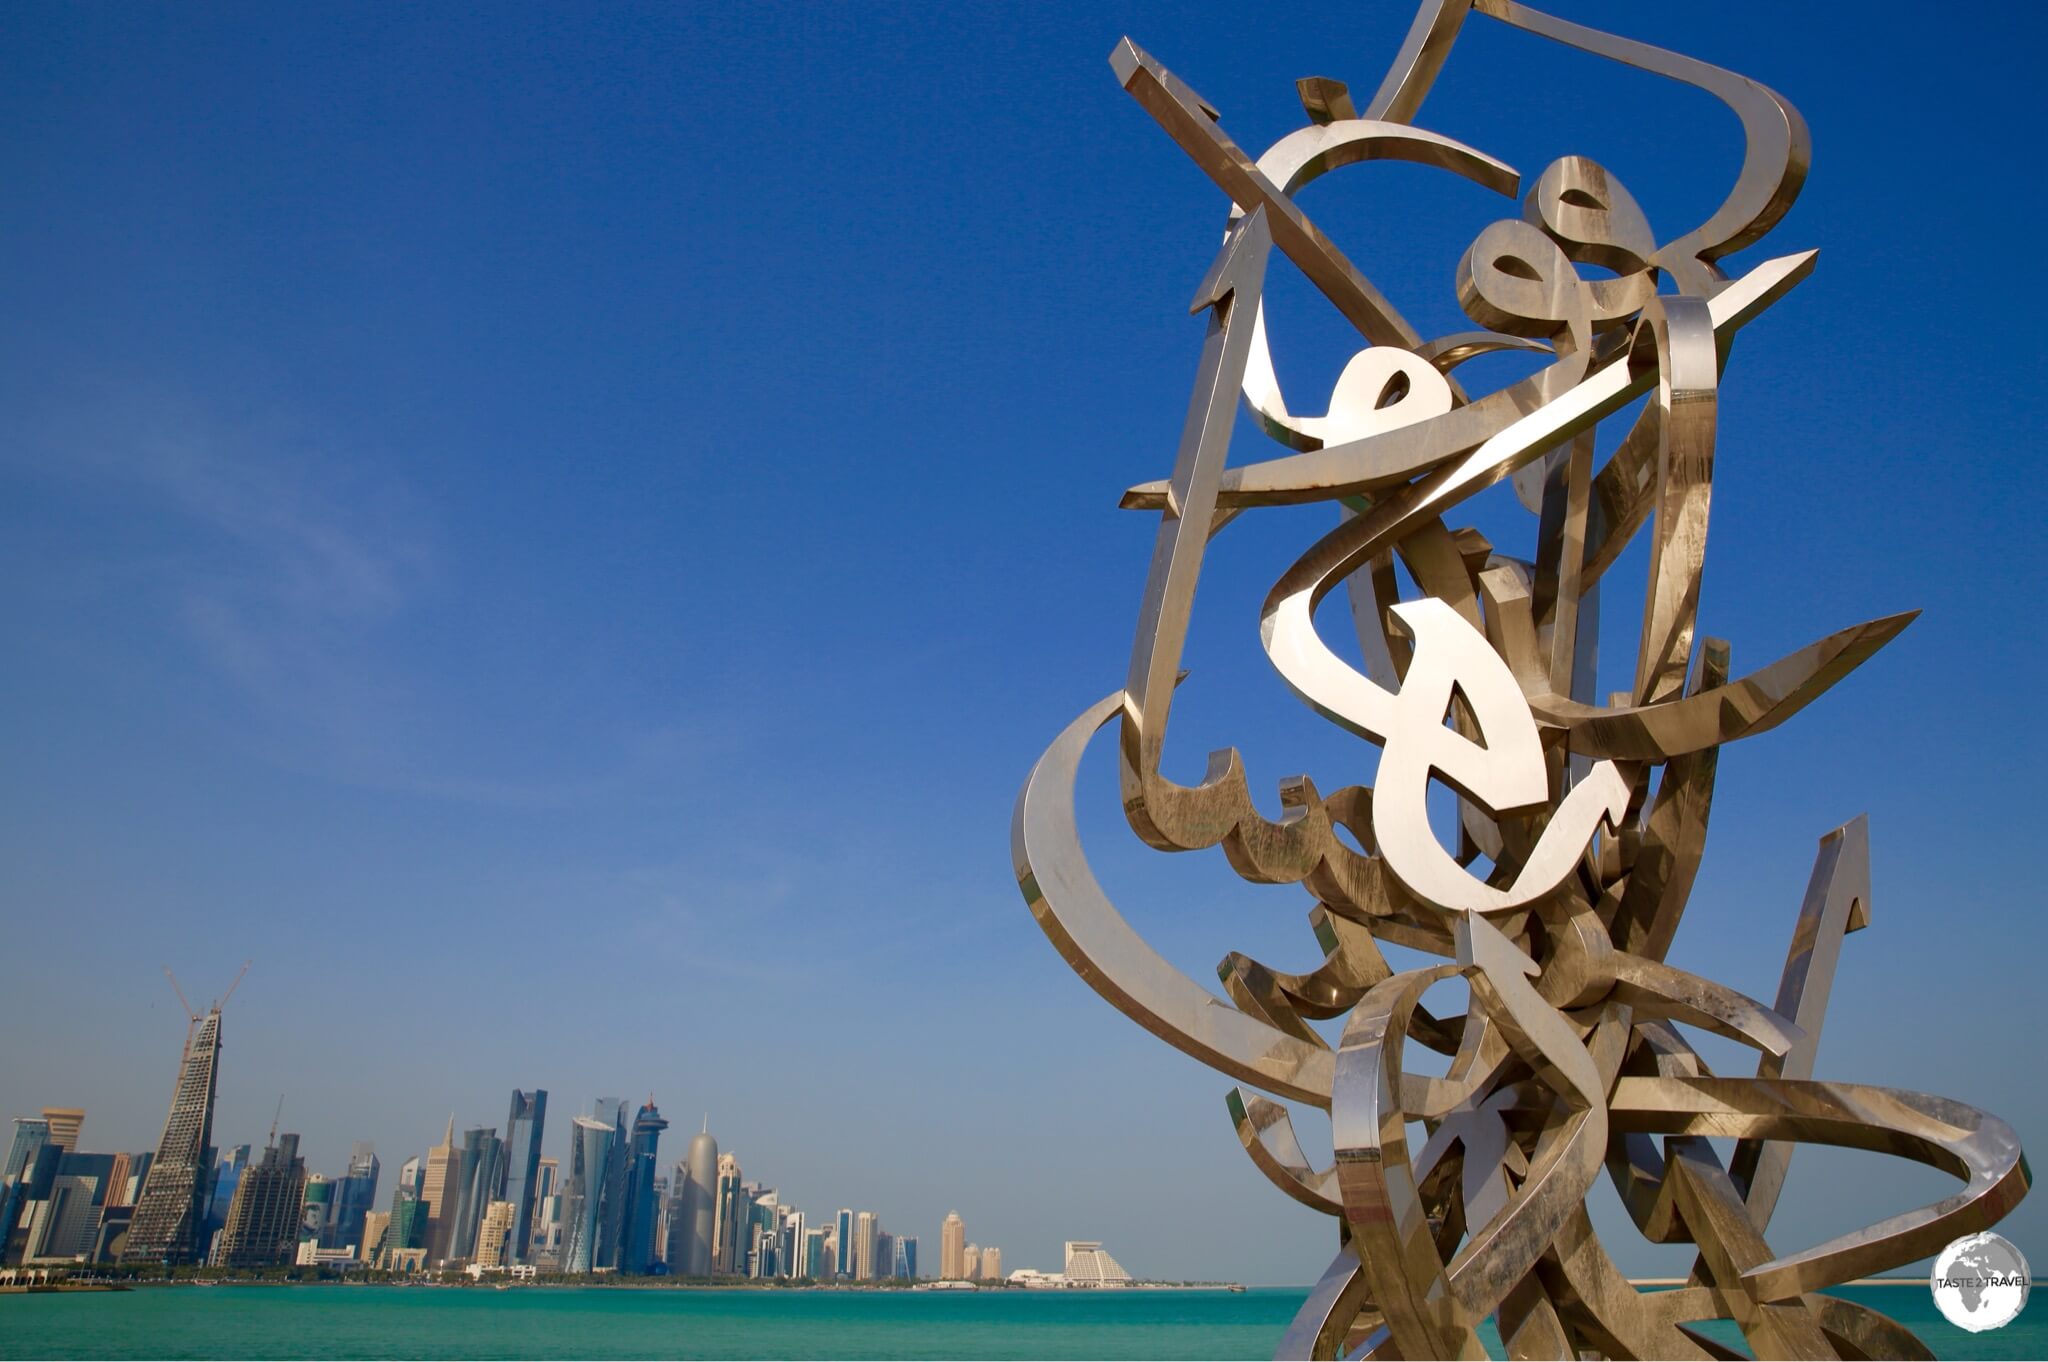 "And amongst the Sultan's I stood out." A stainless steel calligraphy sculpture by artist Sabah Arbilli adorns the Corniche. 